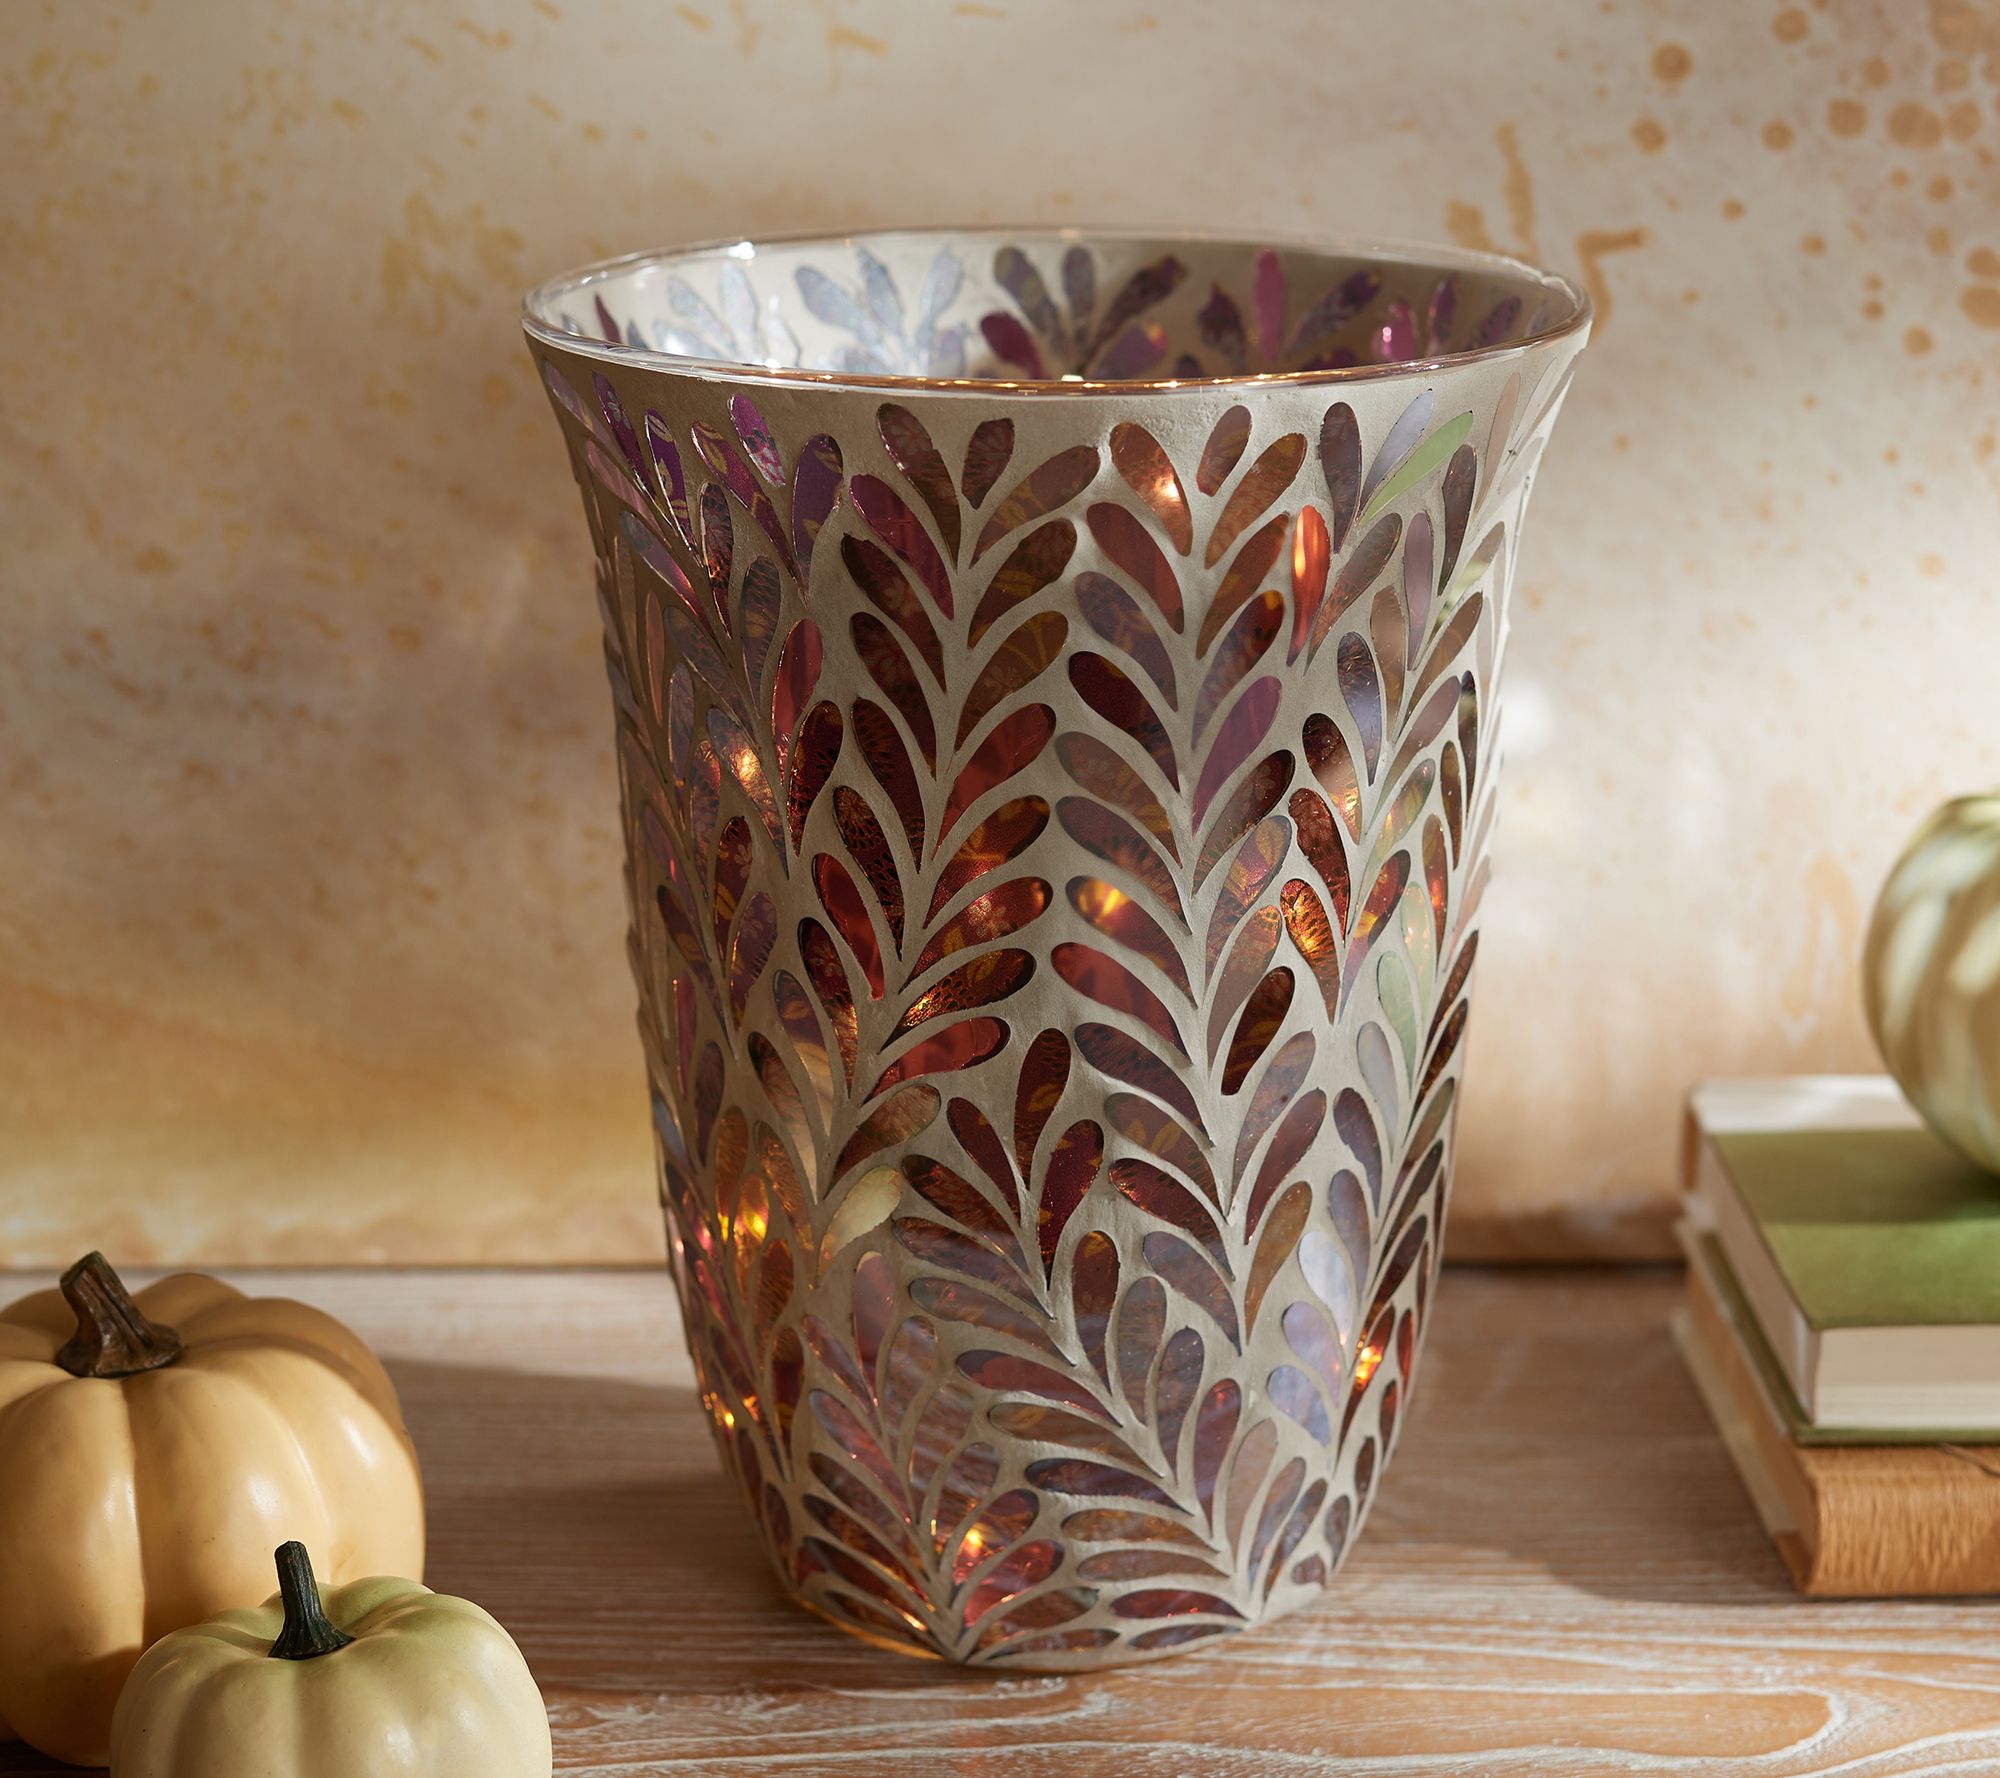 Curved vase with glowing mosaic leaf design